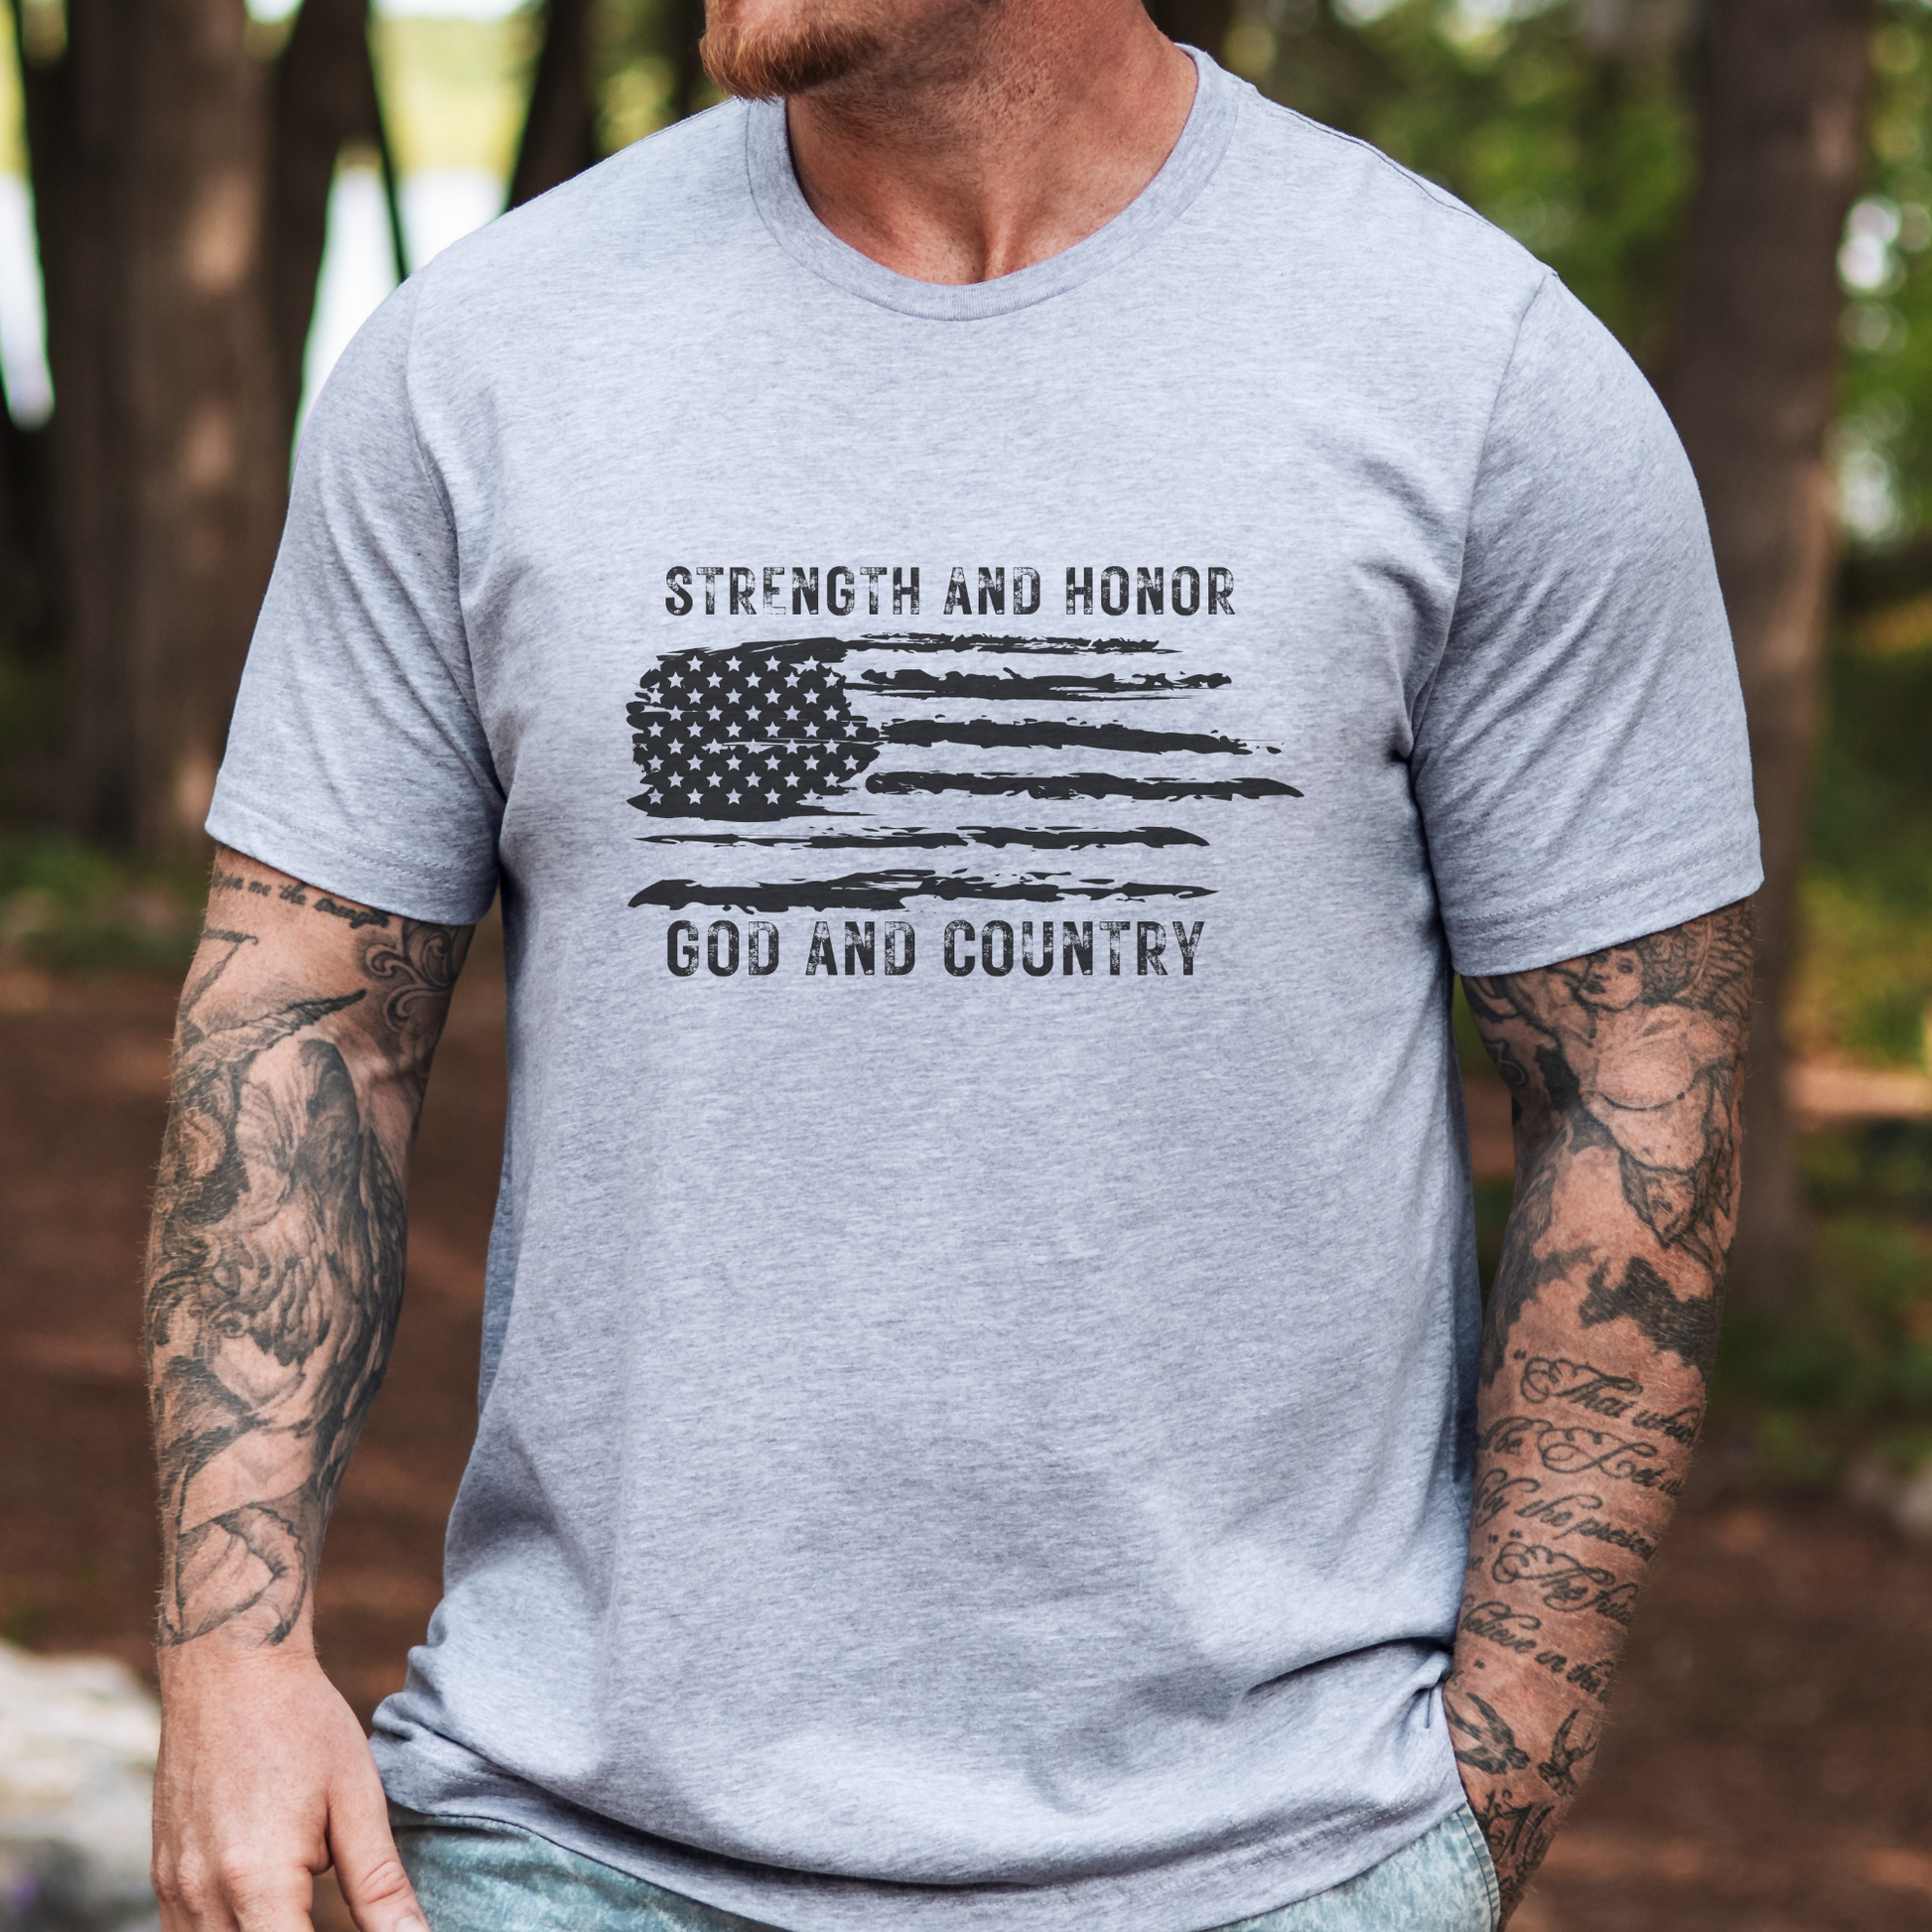 Rakkgear GOD and Country Short Sleeve Tee in grey